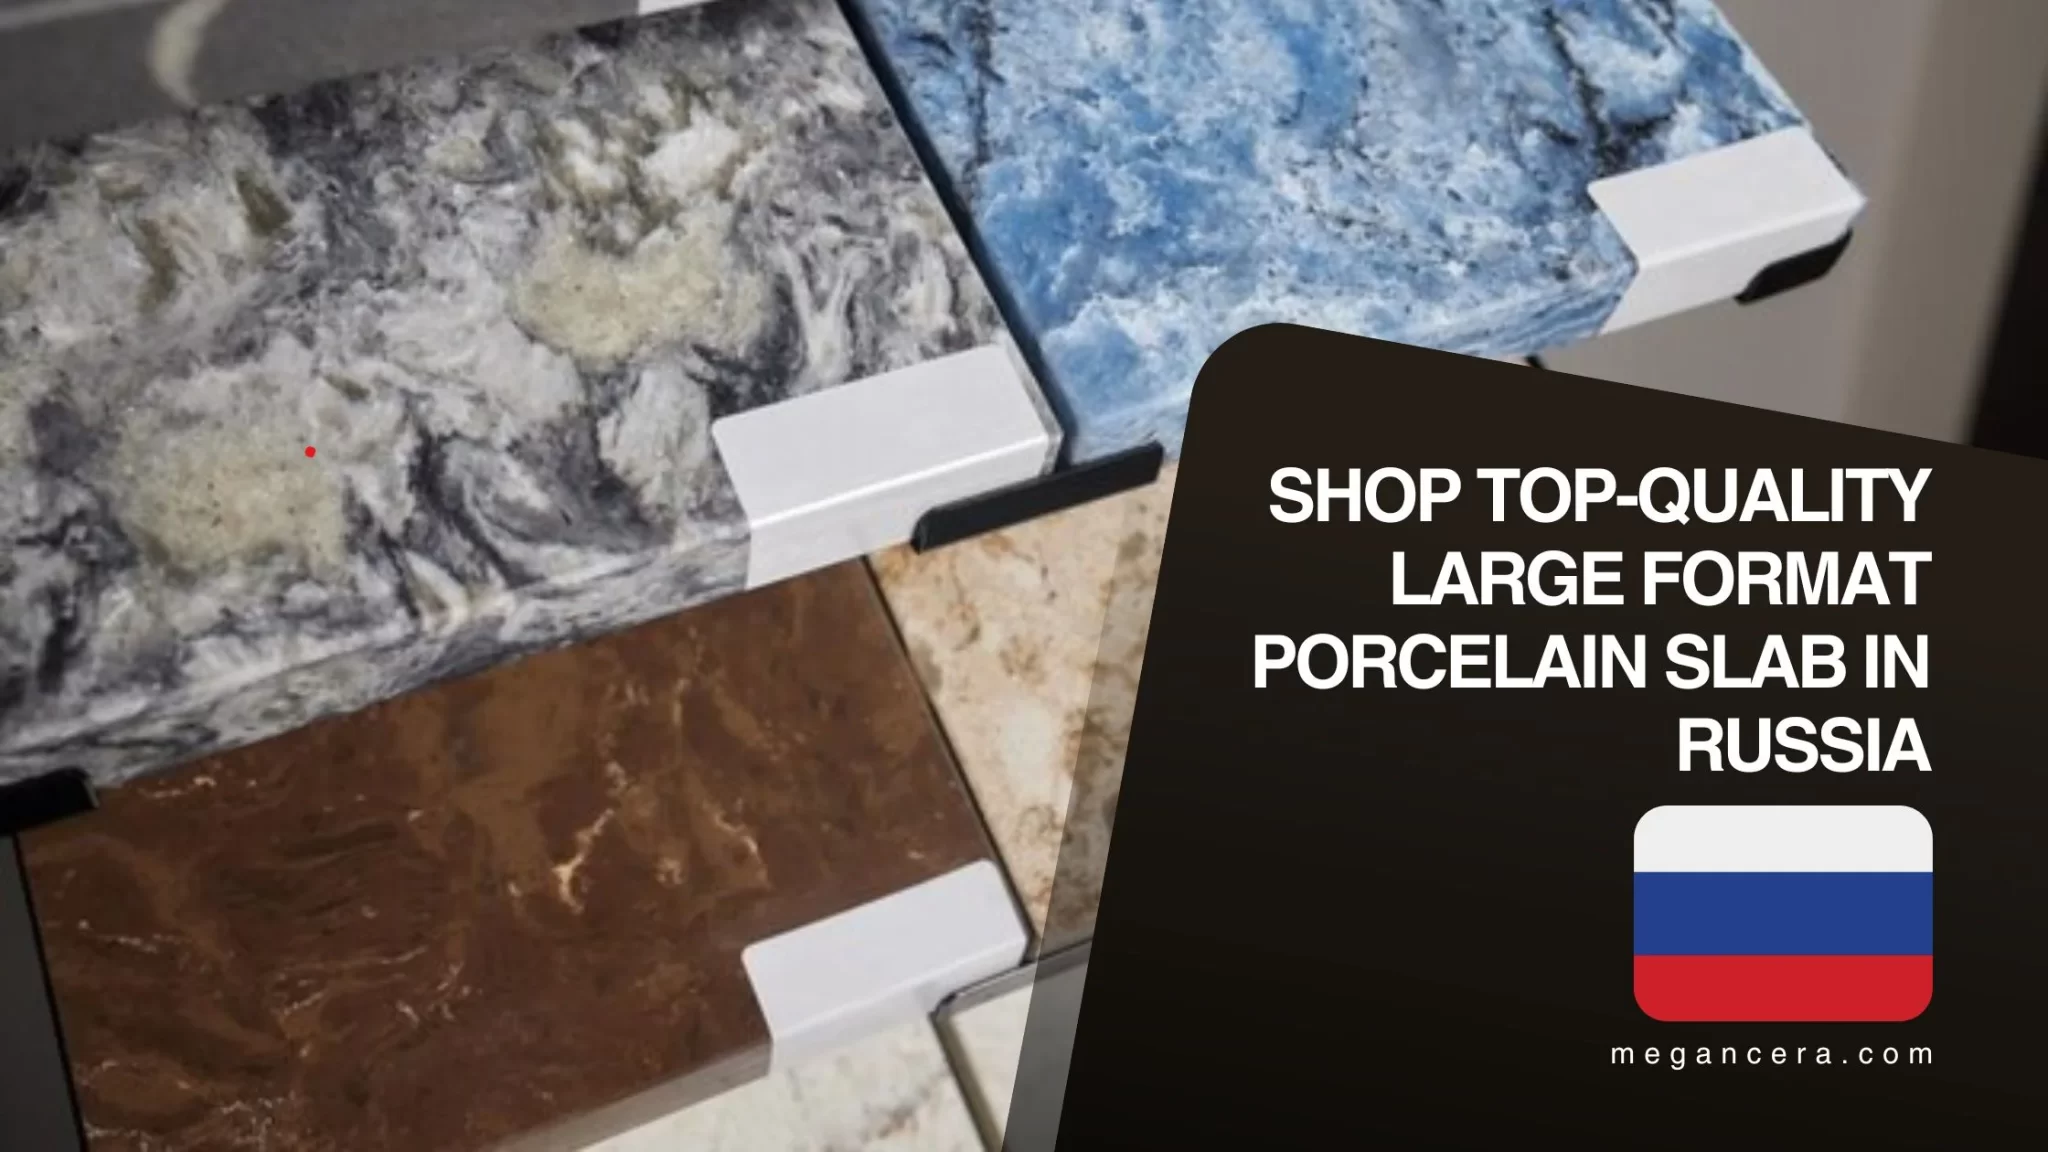 Shop Top-Quality Large Format Porcelain Slab in Russia